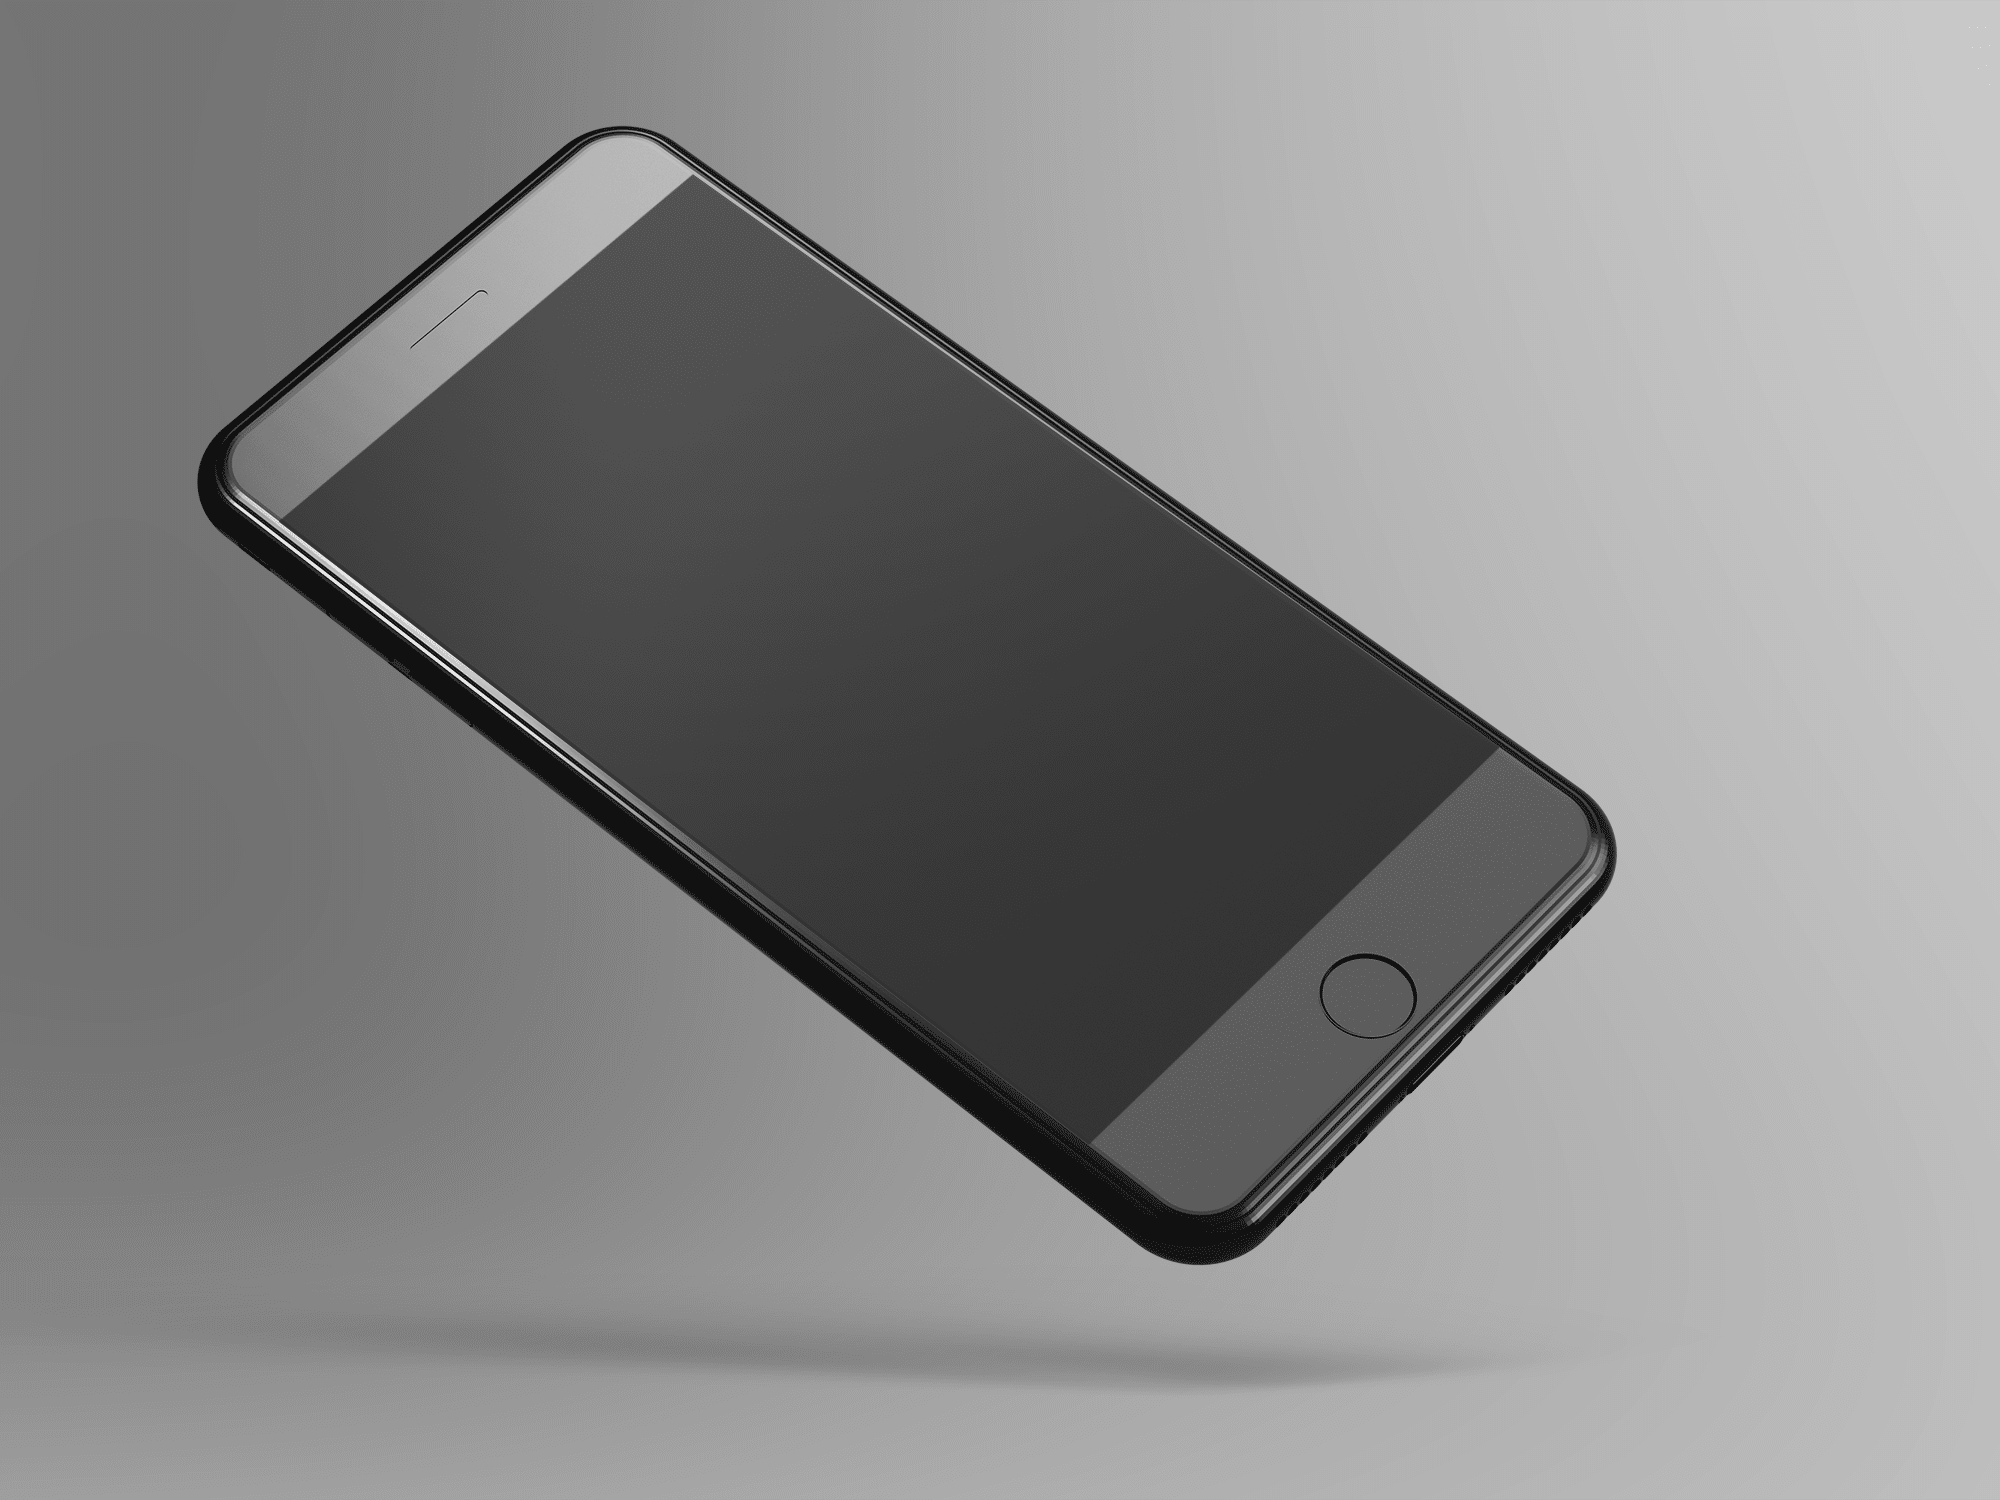 Download Tilted iPhone 8 Mockup | The Mockup Club